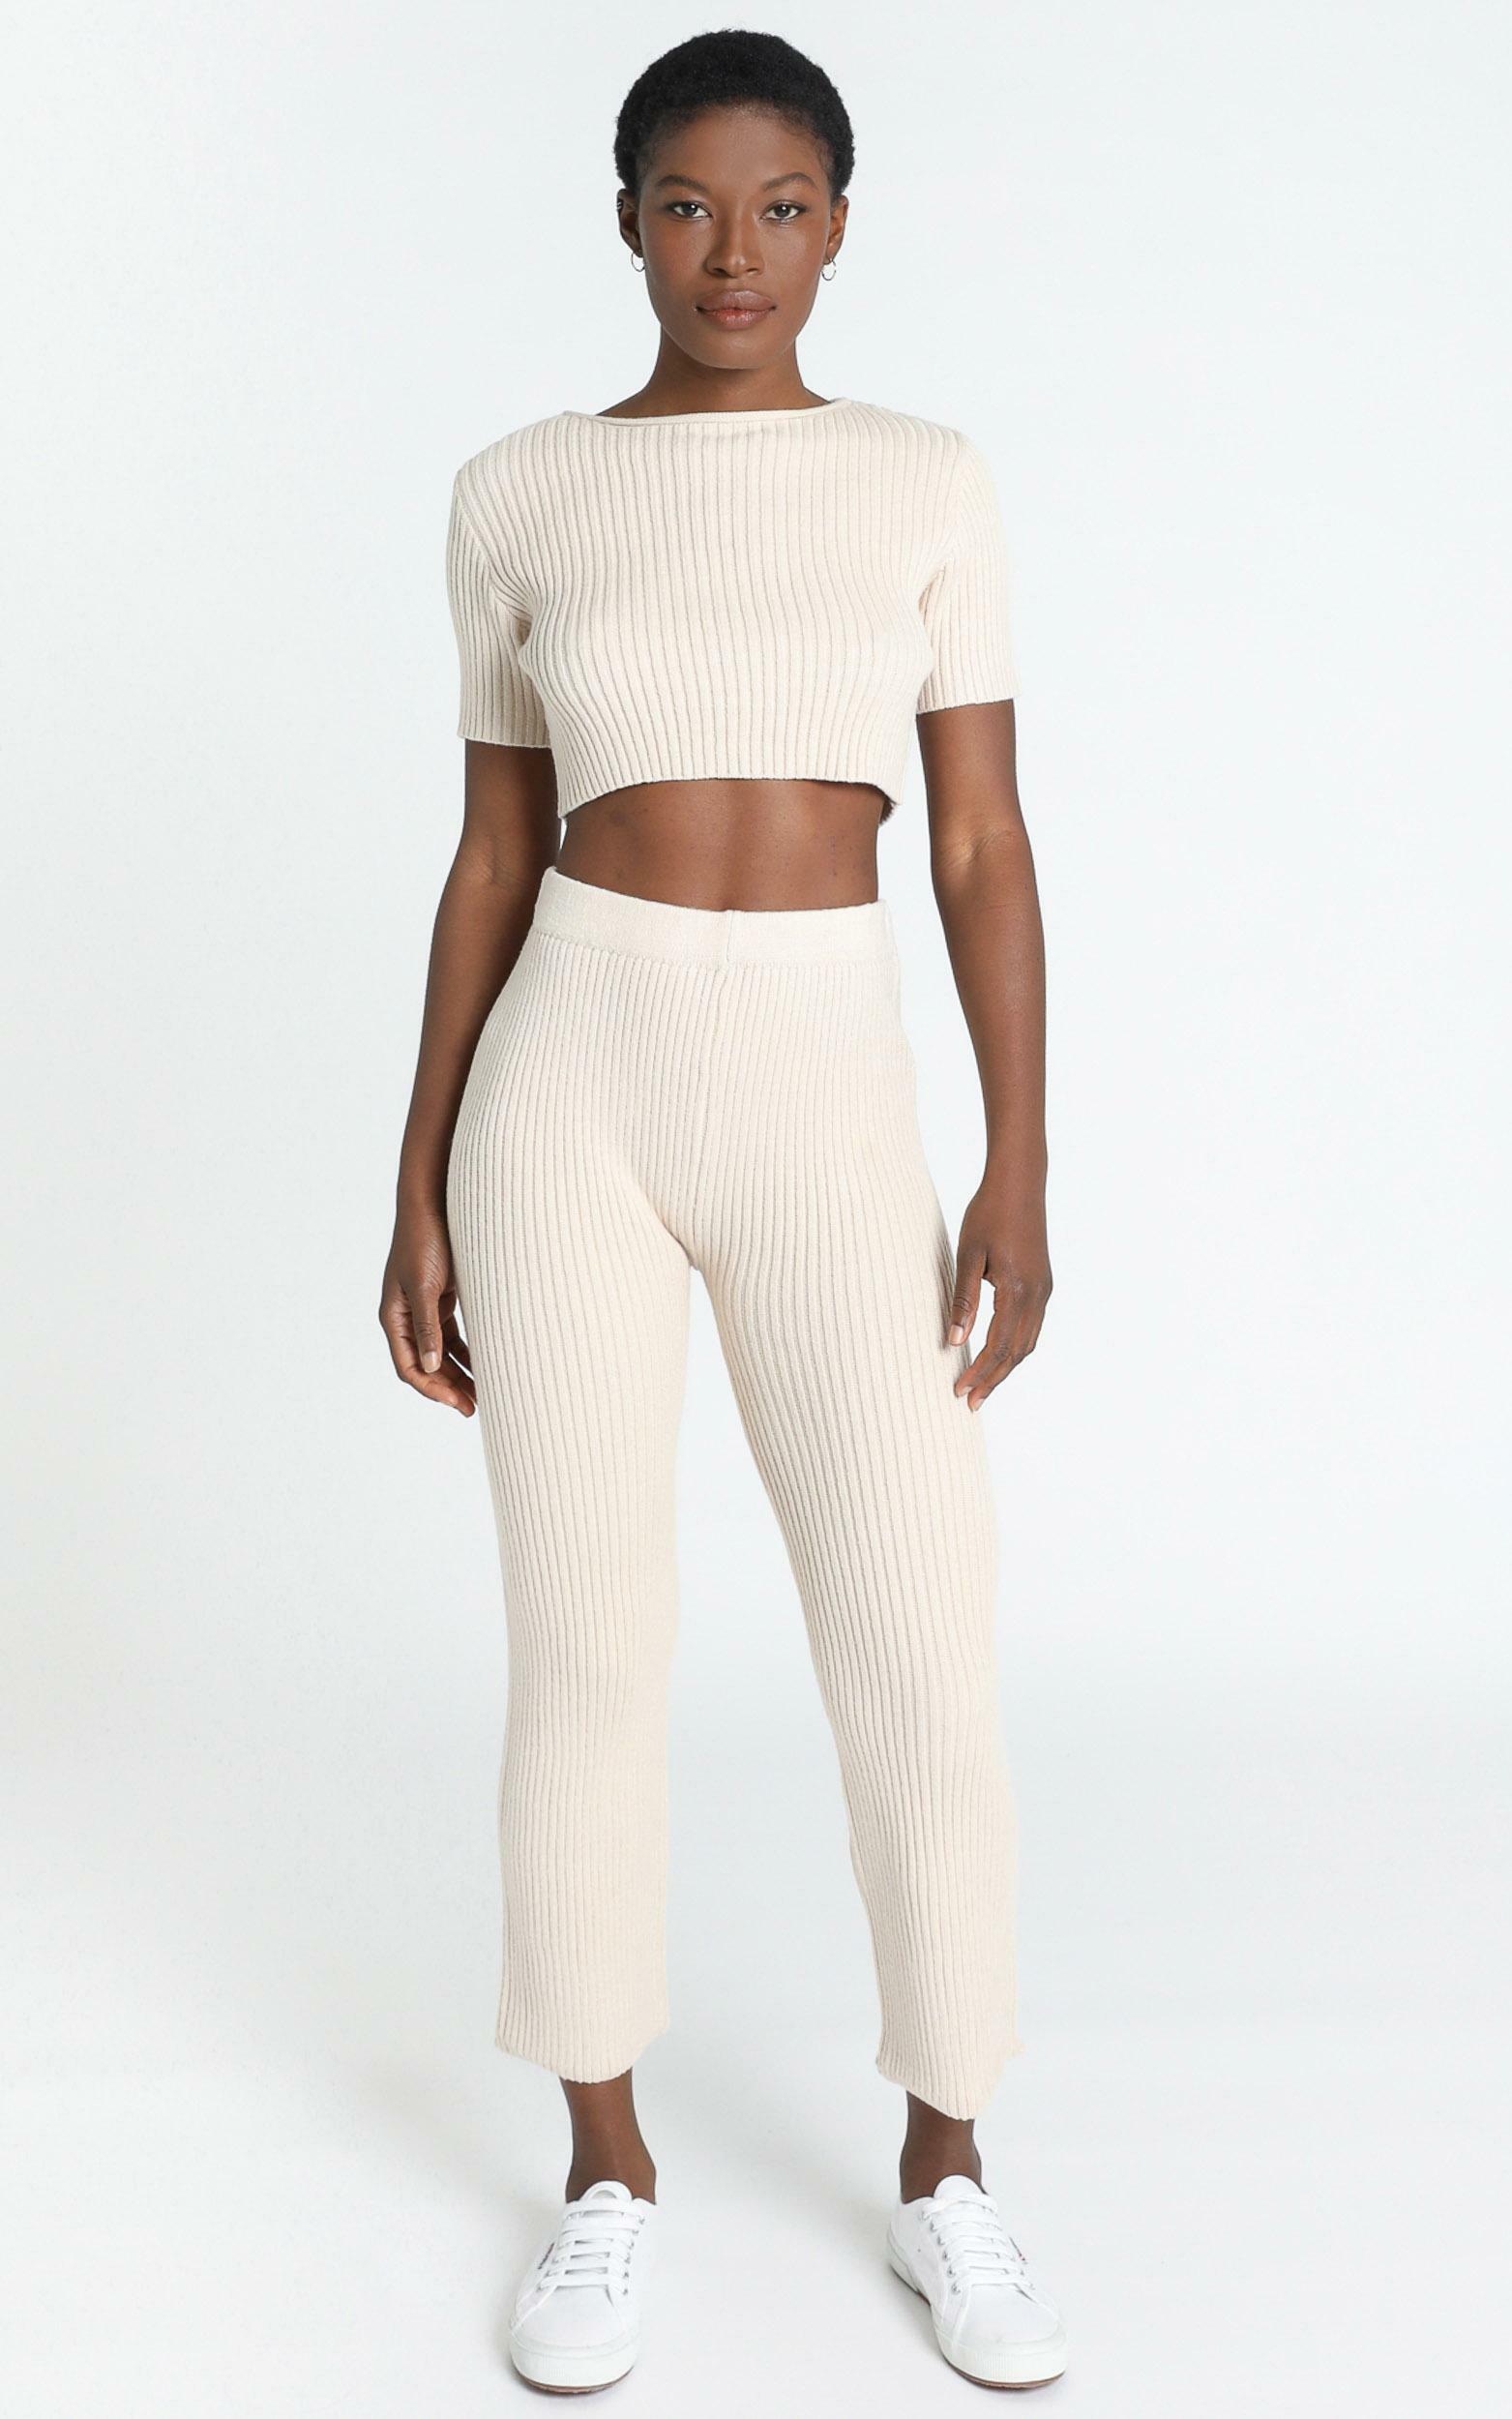 Mylah Two Piece Knit Set in Beige - 08, BRN1, hi-res image number null